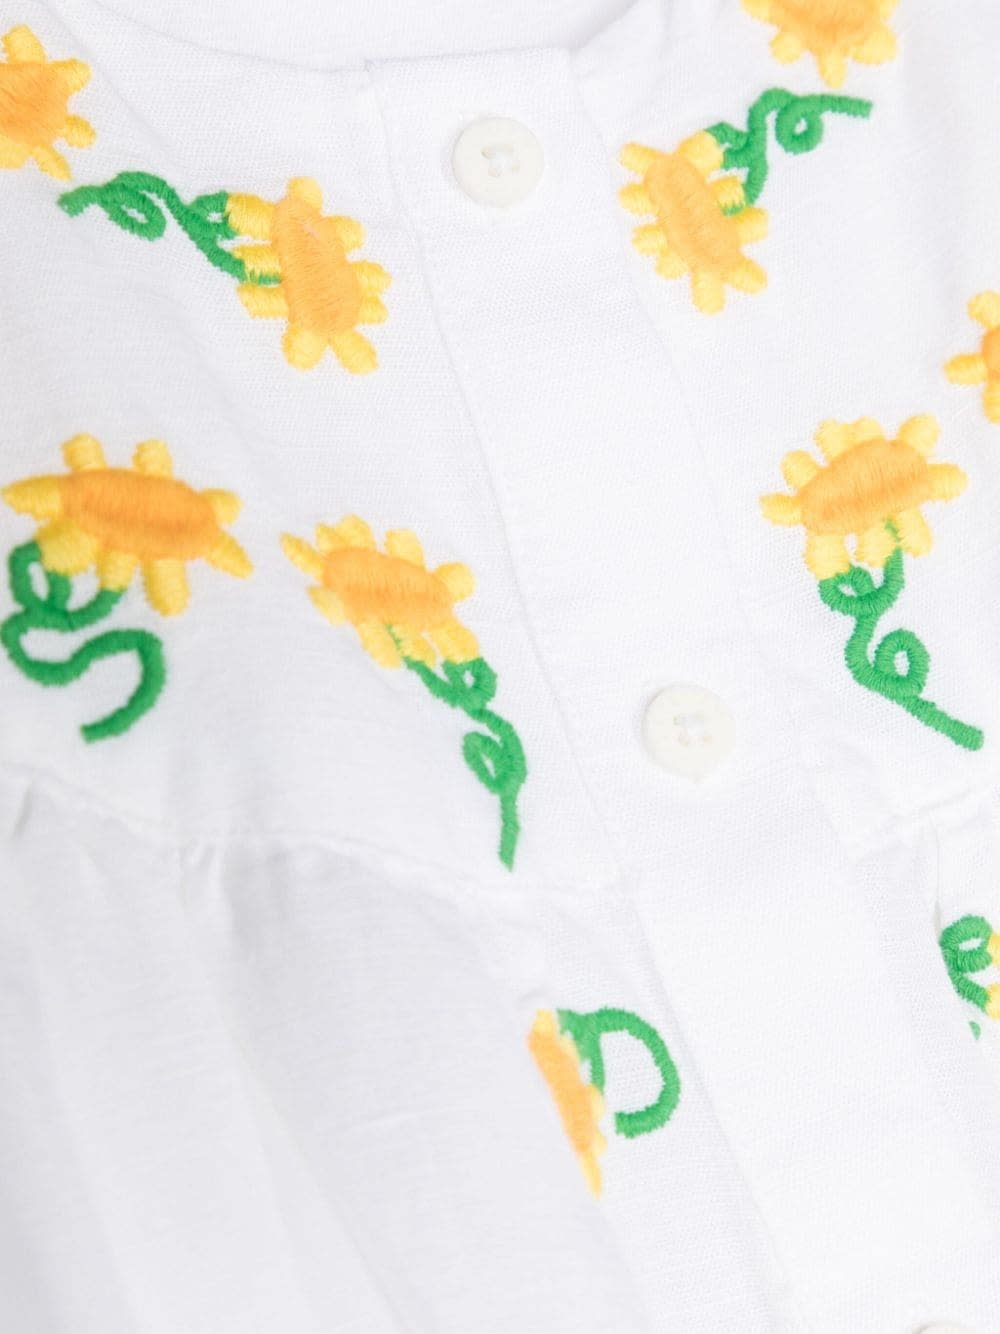 Shop Stella Mccartney White Dress With Embroidered Sunflowers